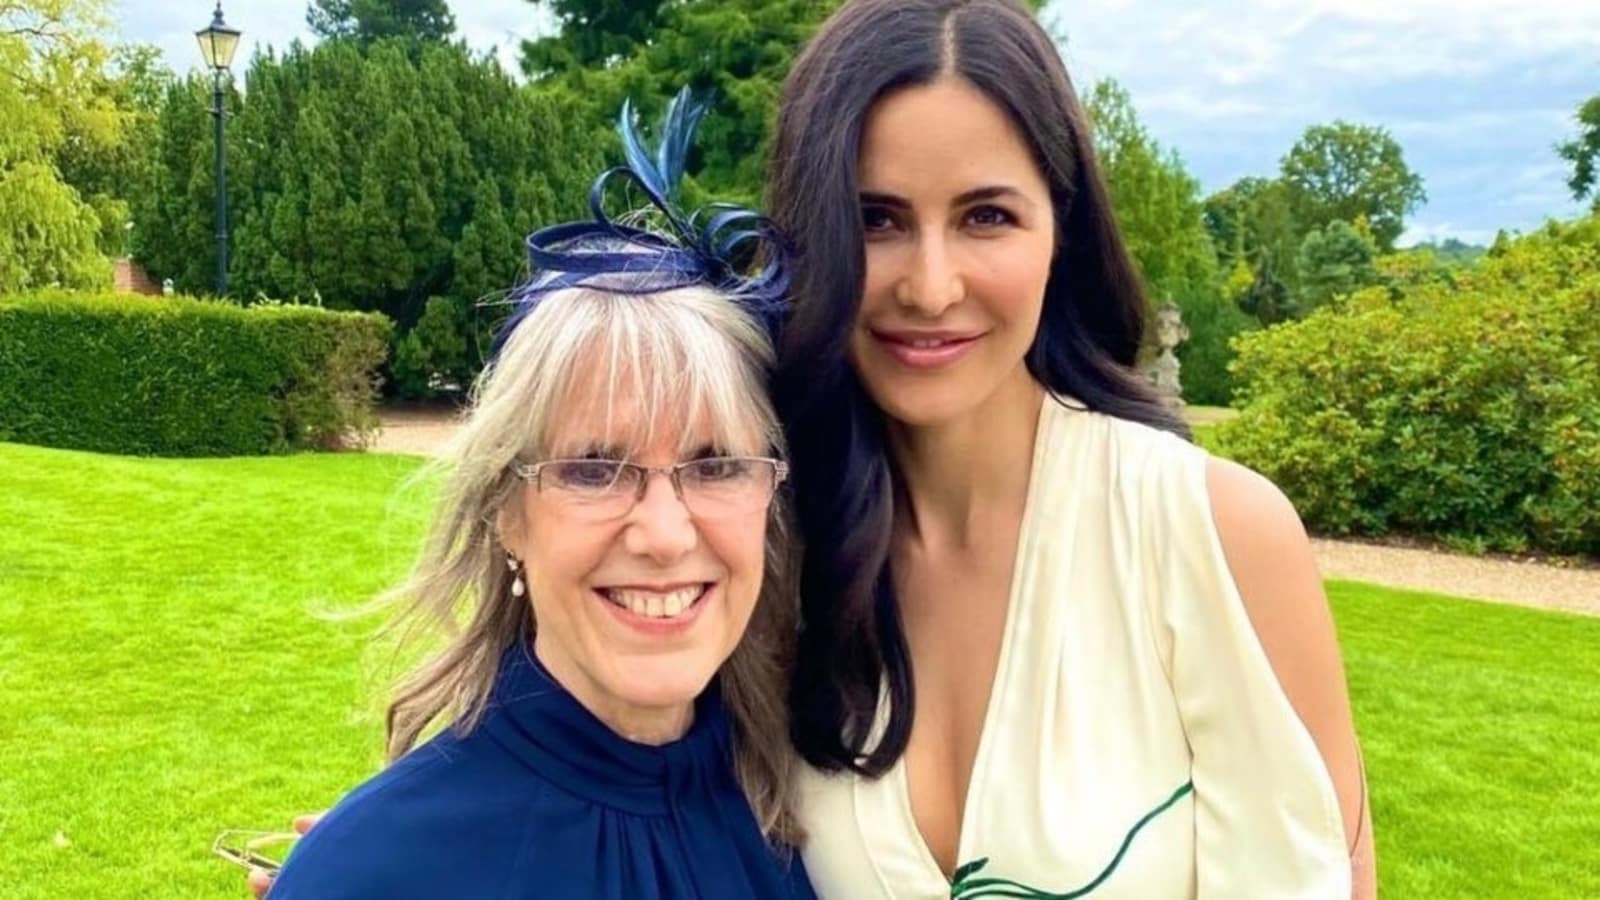 Loved Katrina Kaif’s printed open-shoulder dress in new pic from Mother’s Day wish? It costs a whopping ₹2 lakh